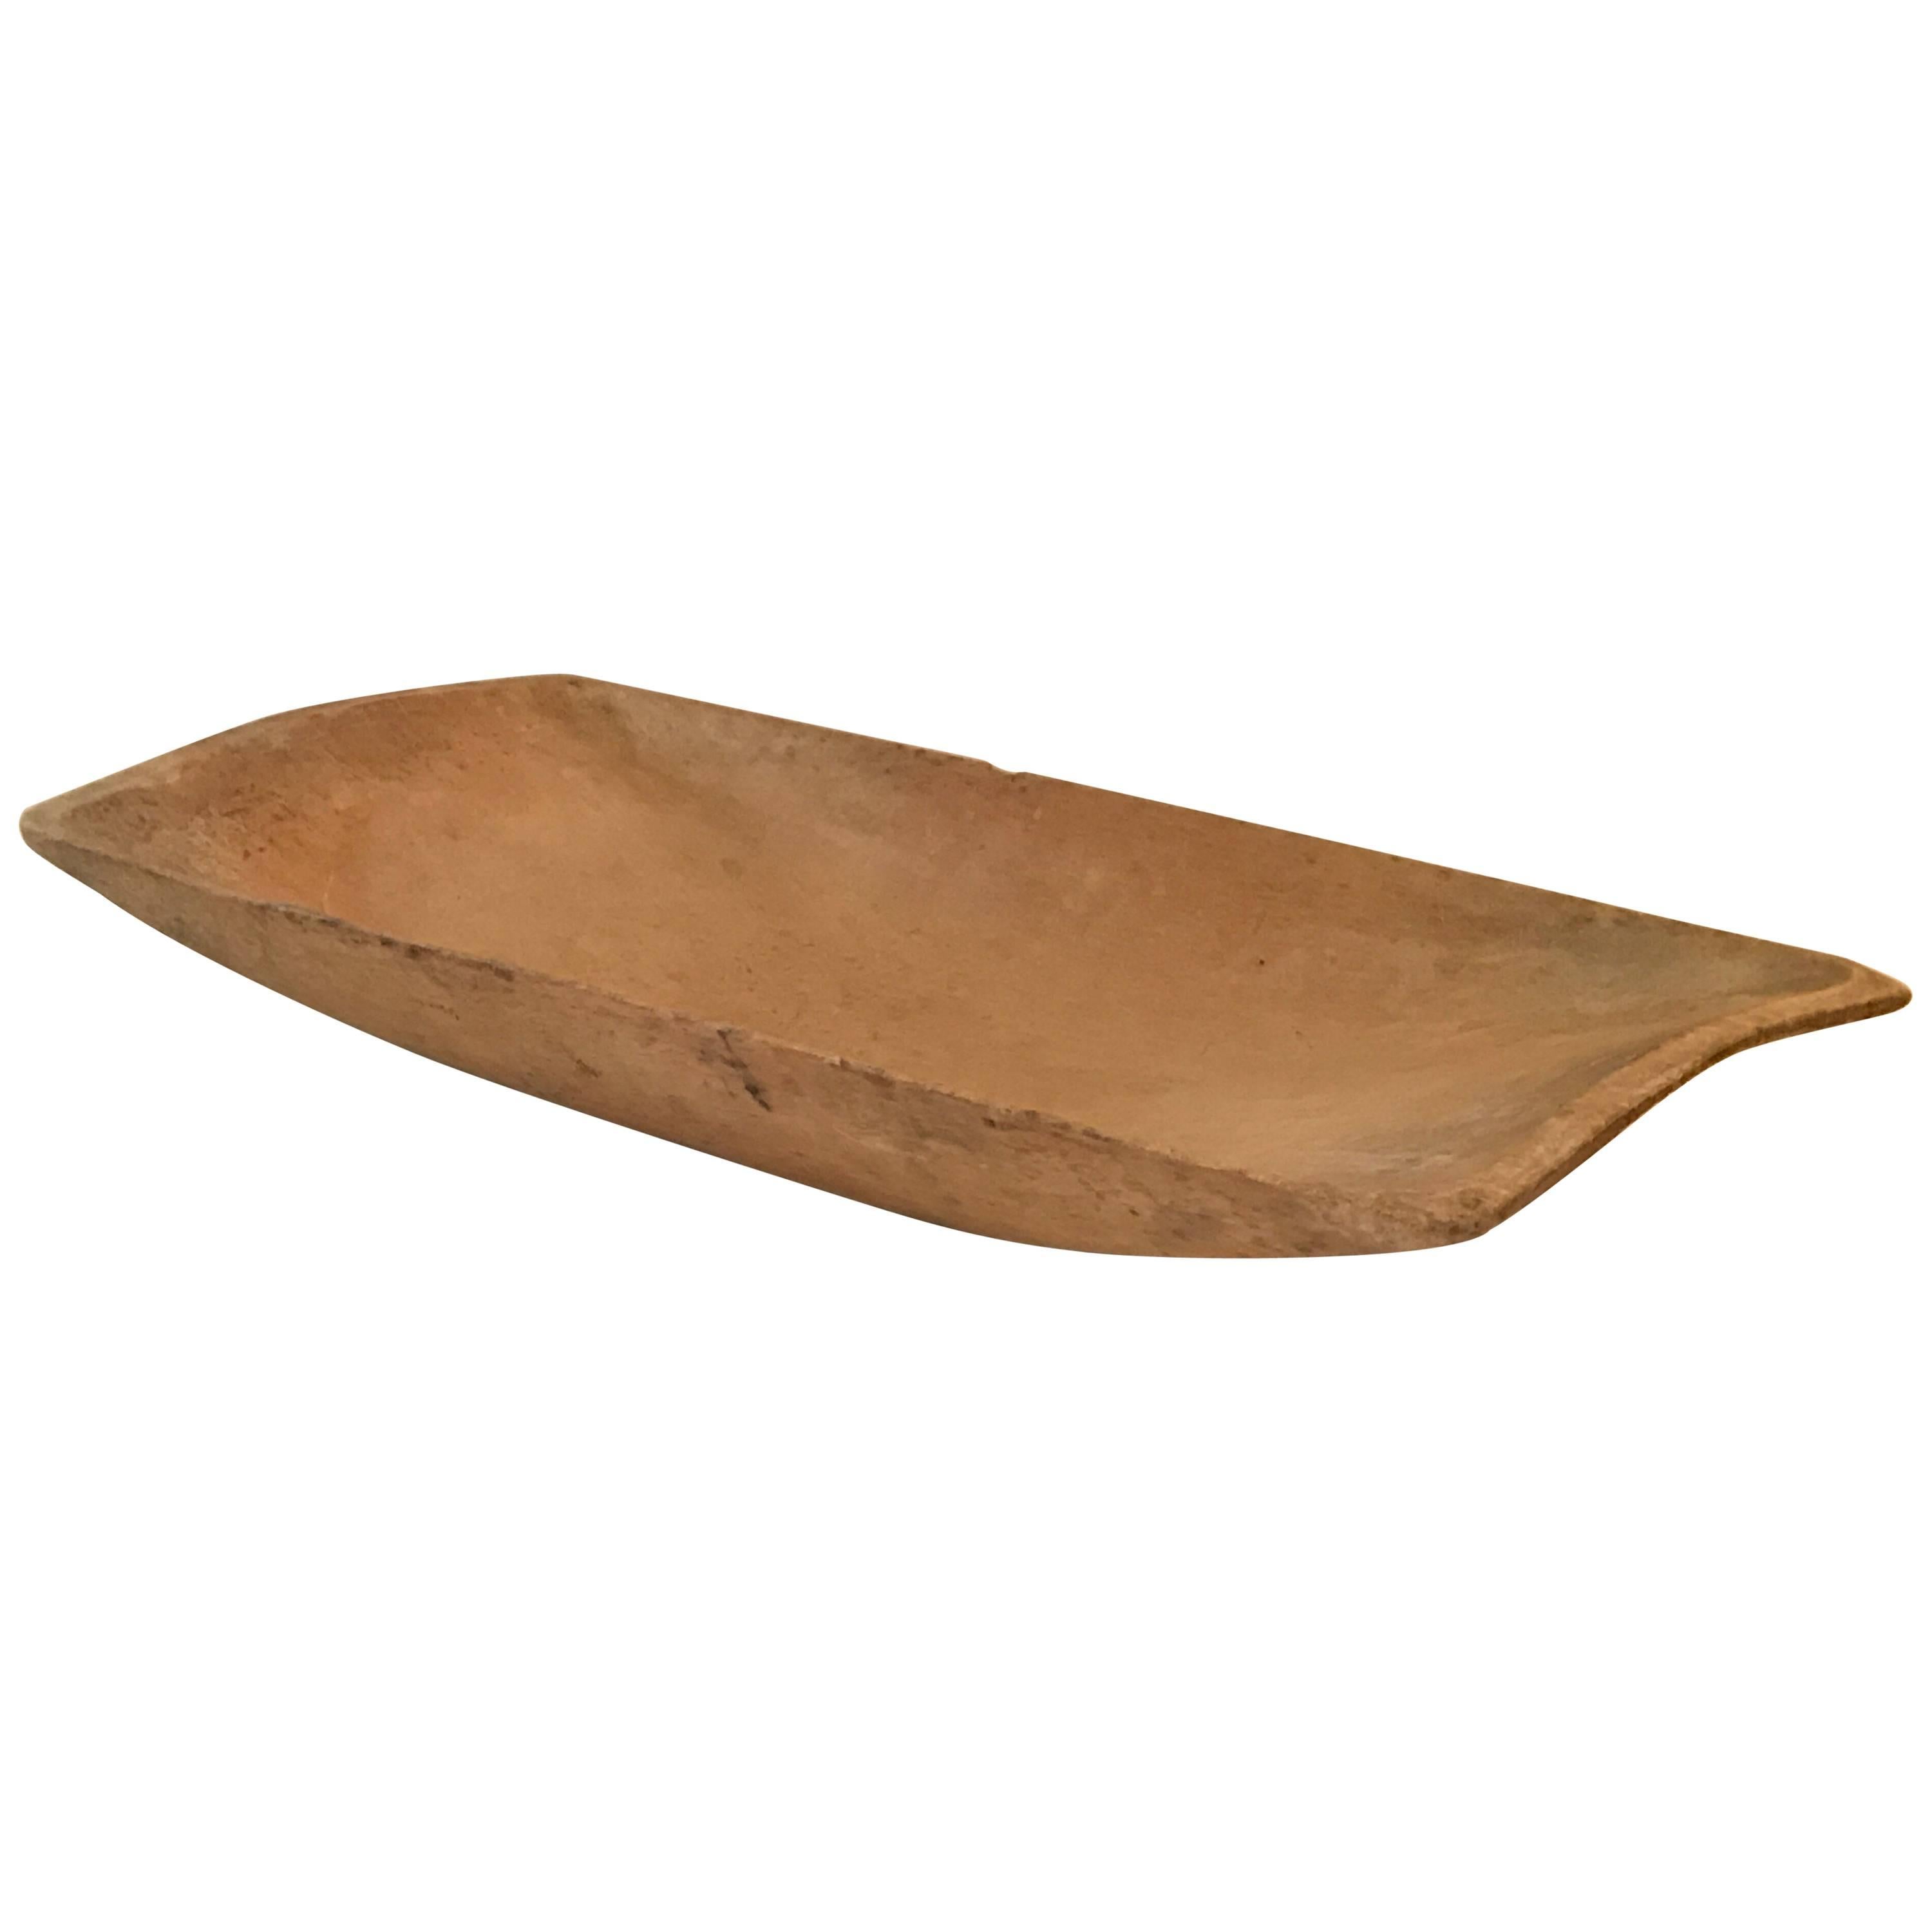 Very Large Swedish Wooden Rectangular Bowl Baking Tray, Late 19th Century For Sale